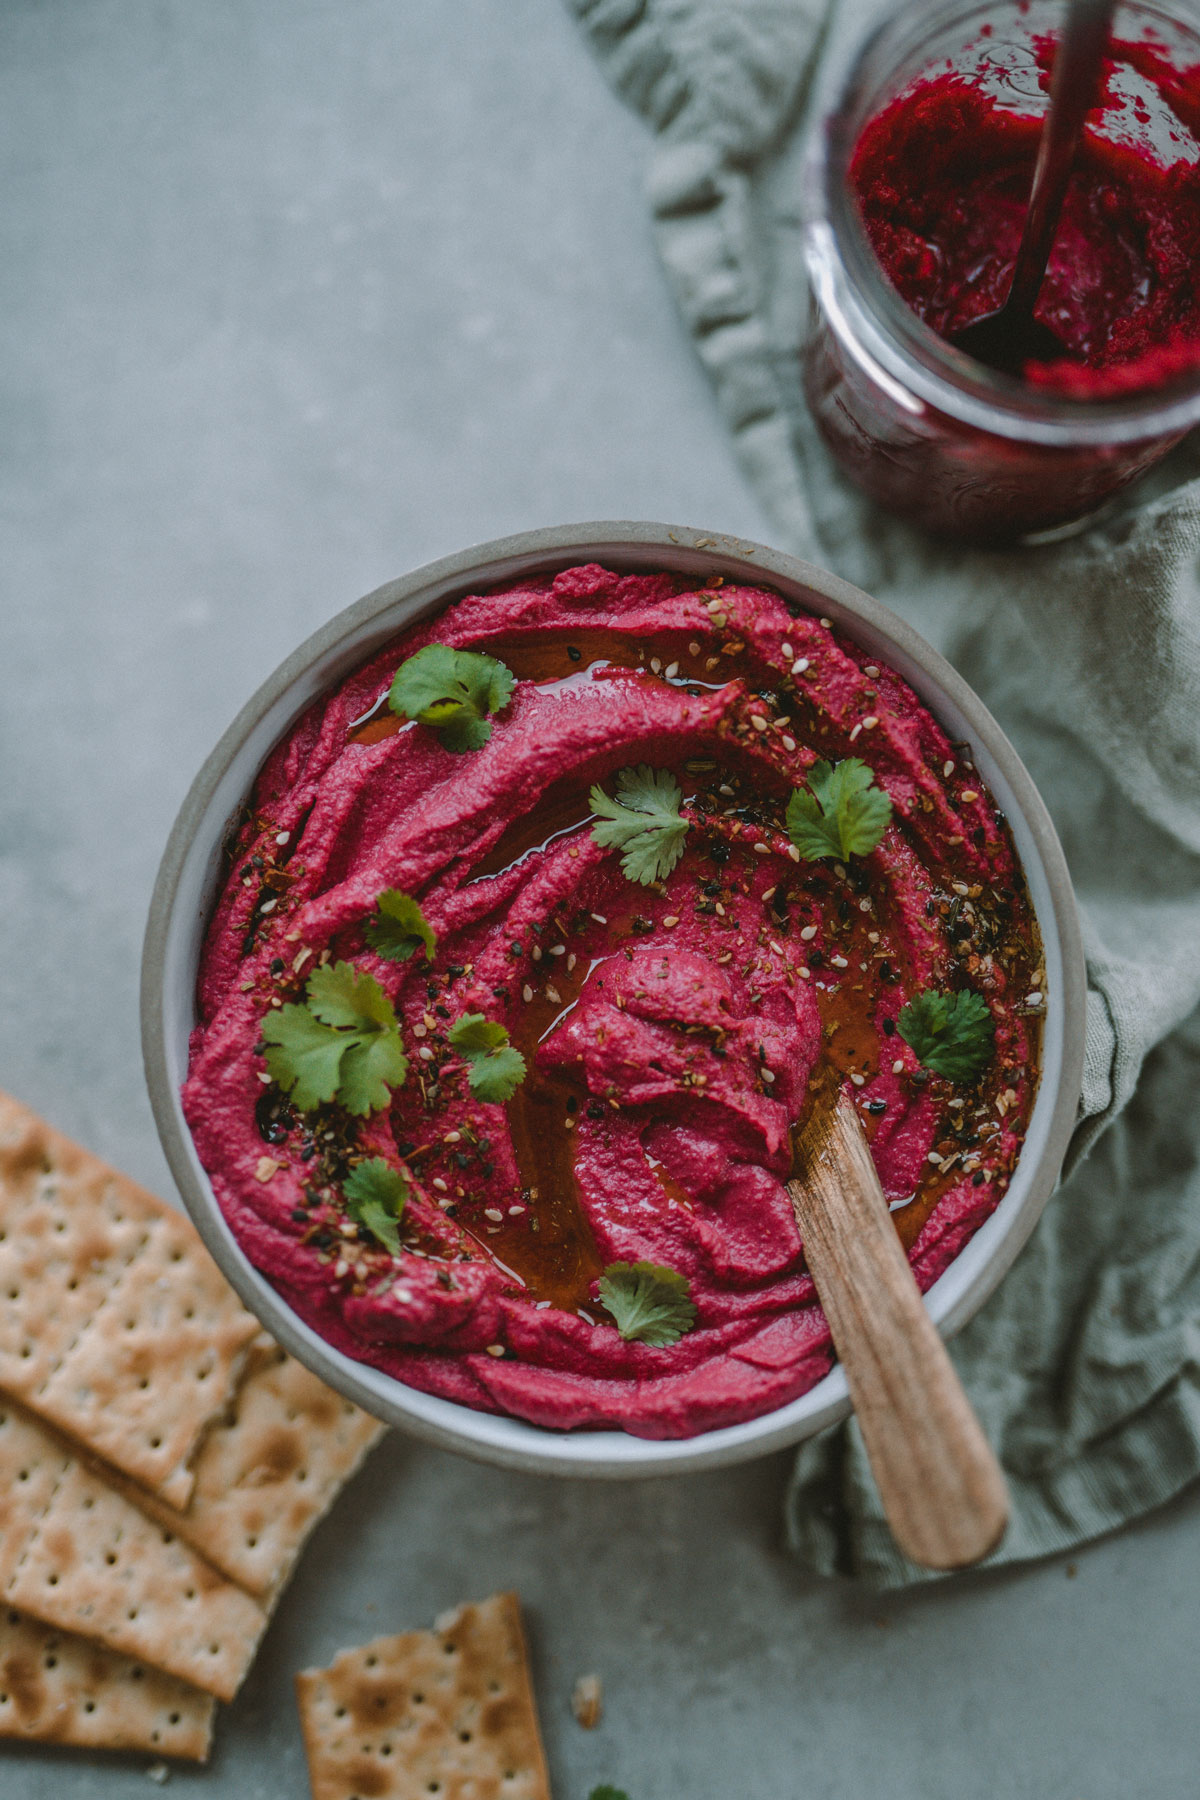 Horseradish sauce with beets ready to serve with crackers